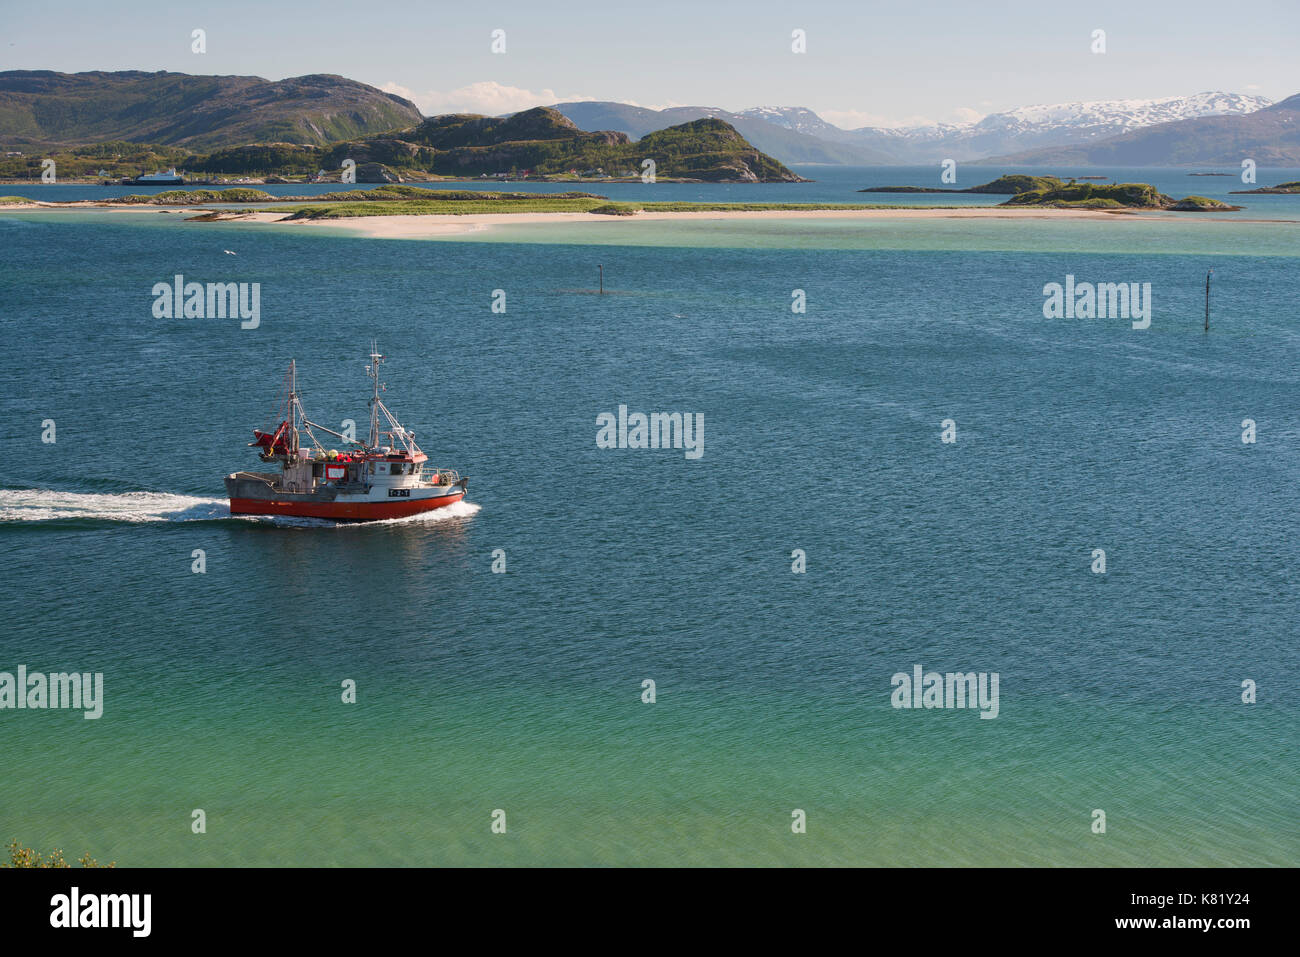 Fishing boat, Island of Sommarøy, Troms province, Northern Norway, Norway Stock Photo